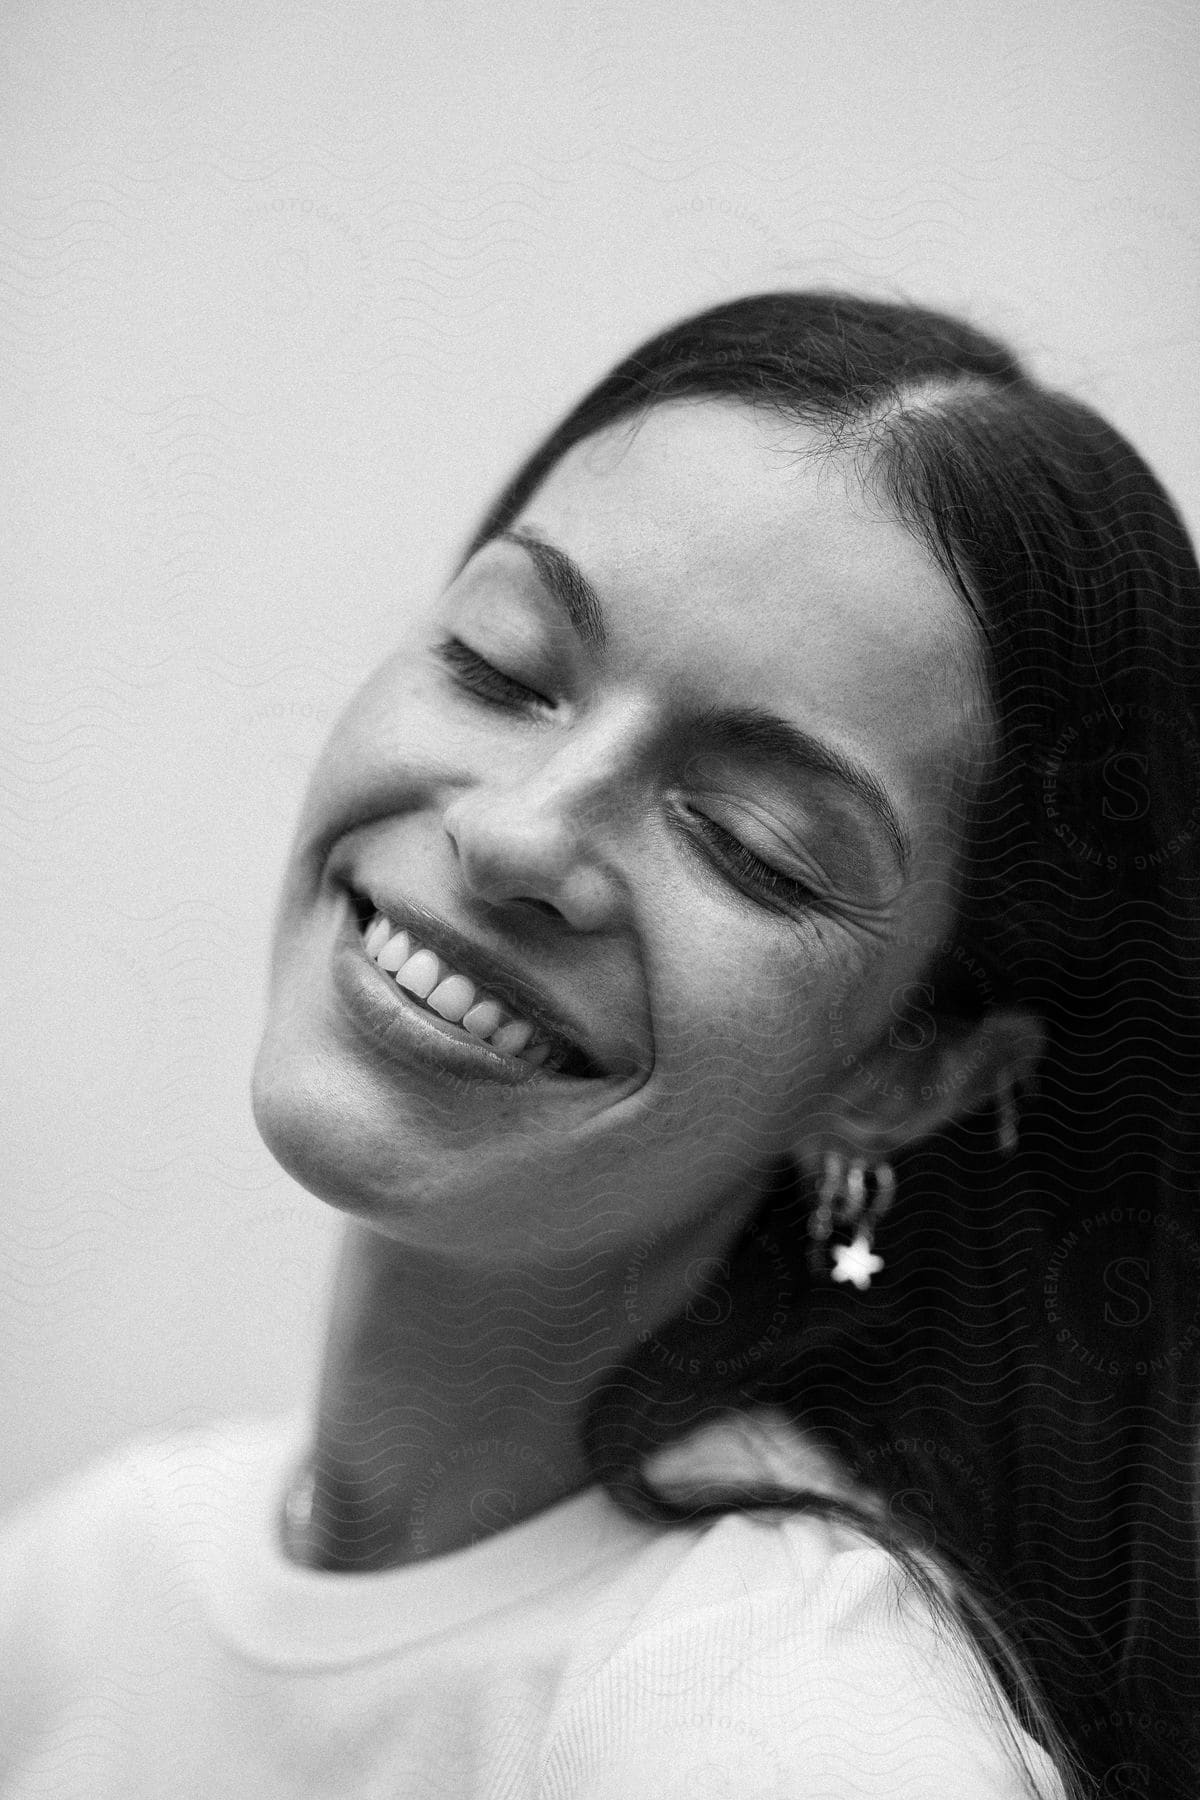 Black and white portrait of a smiling woman with her eyes closed